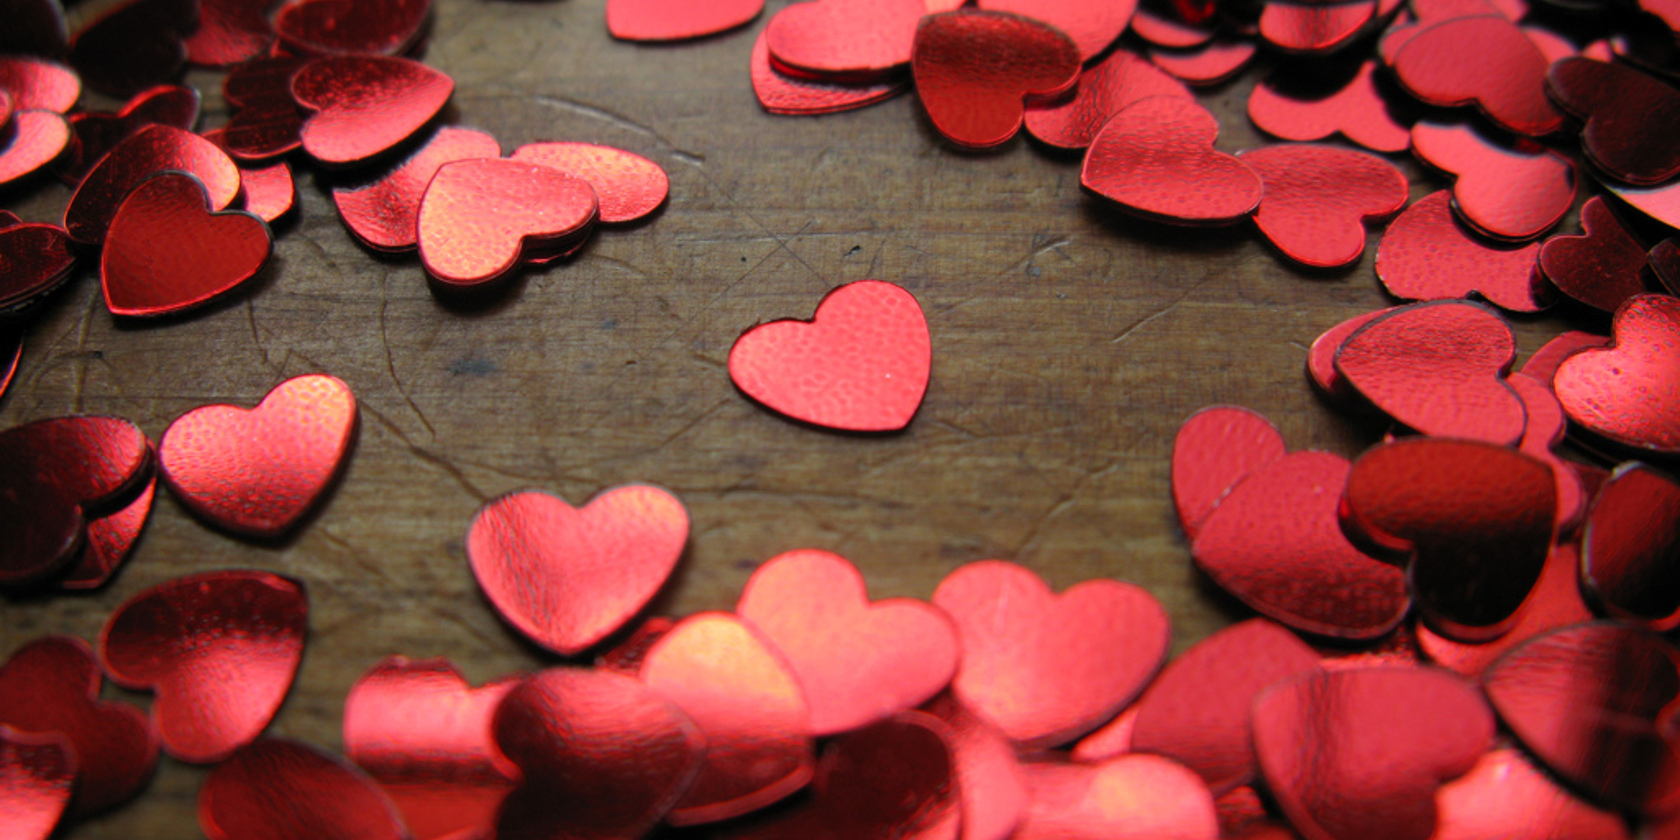 A collection of heart confetti scattered on a table to symbolize valentines day